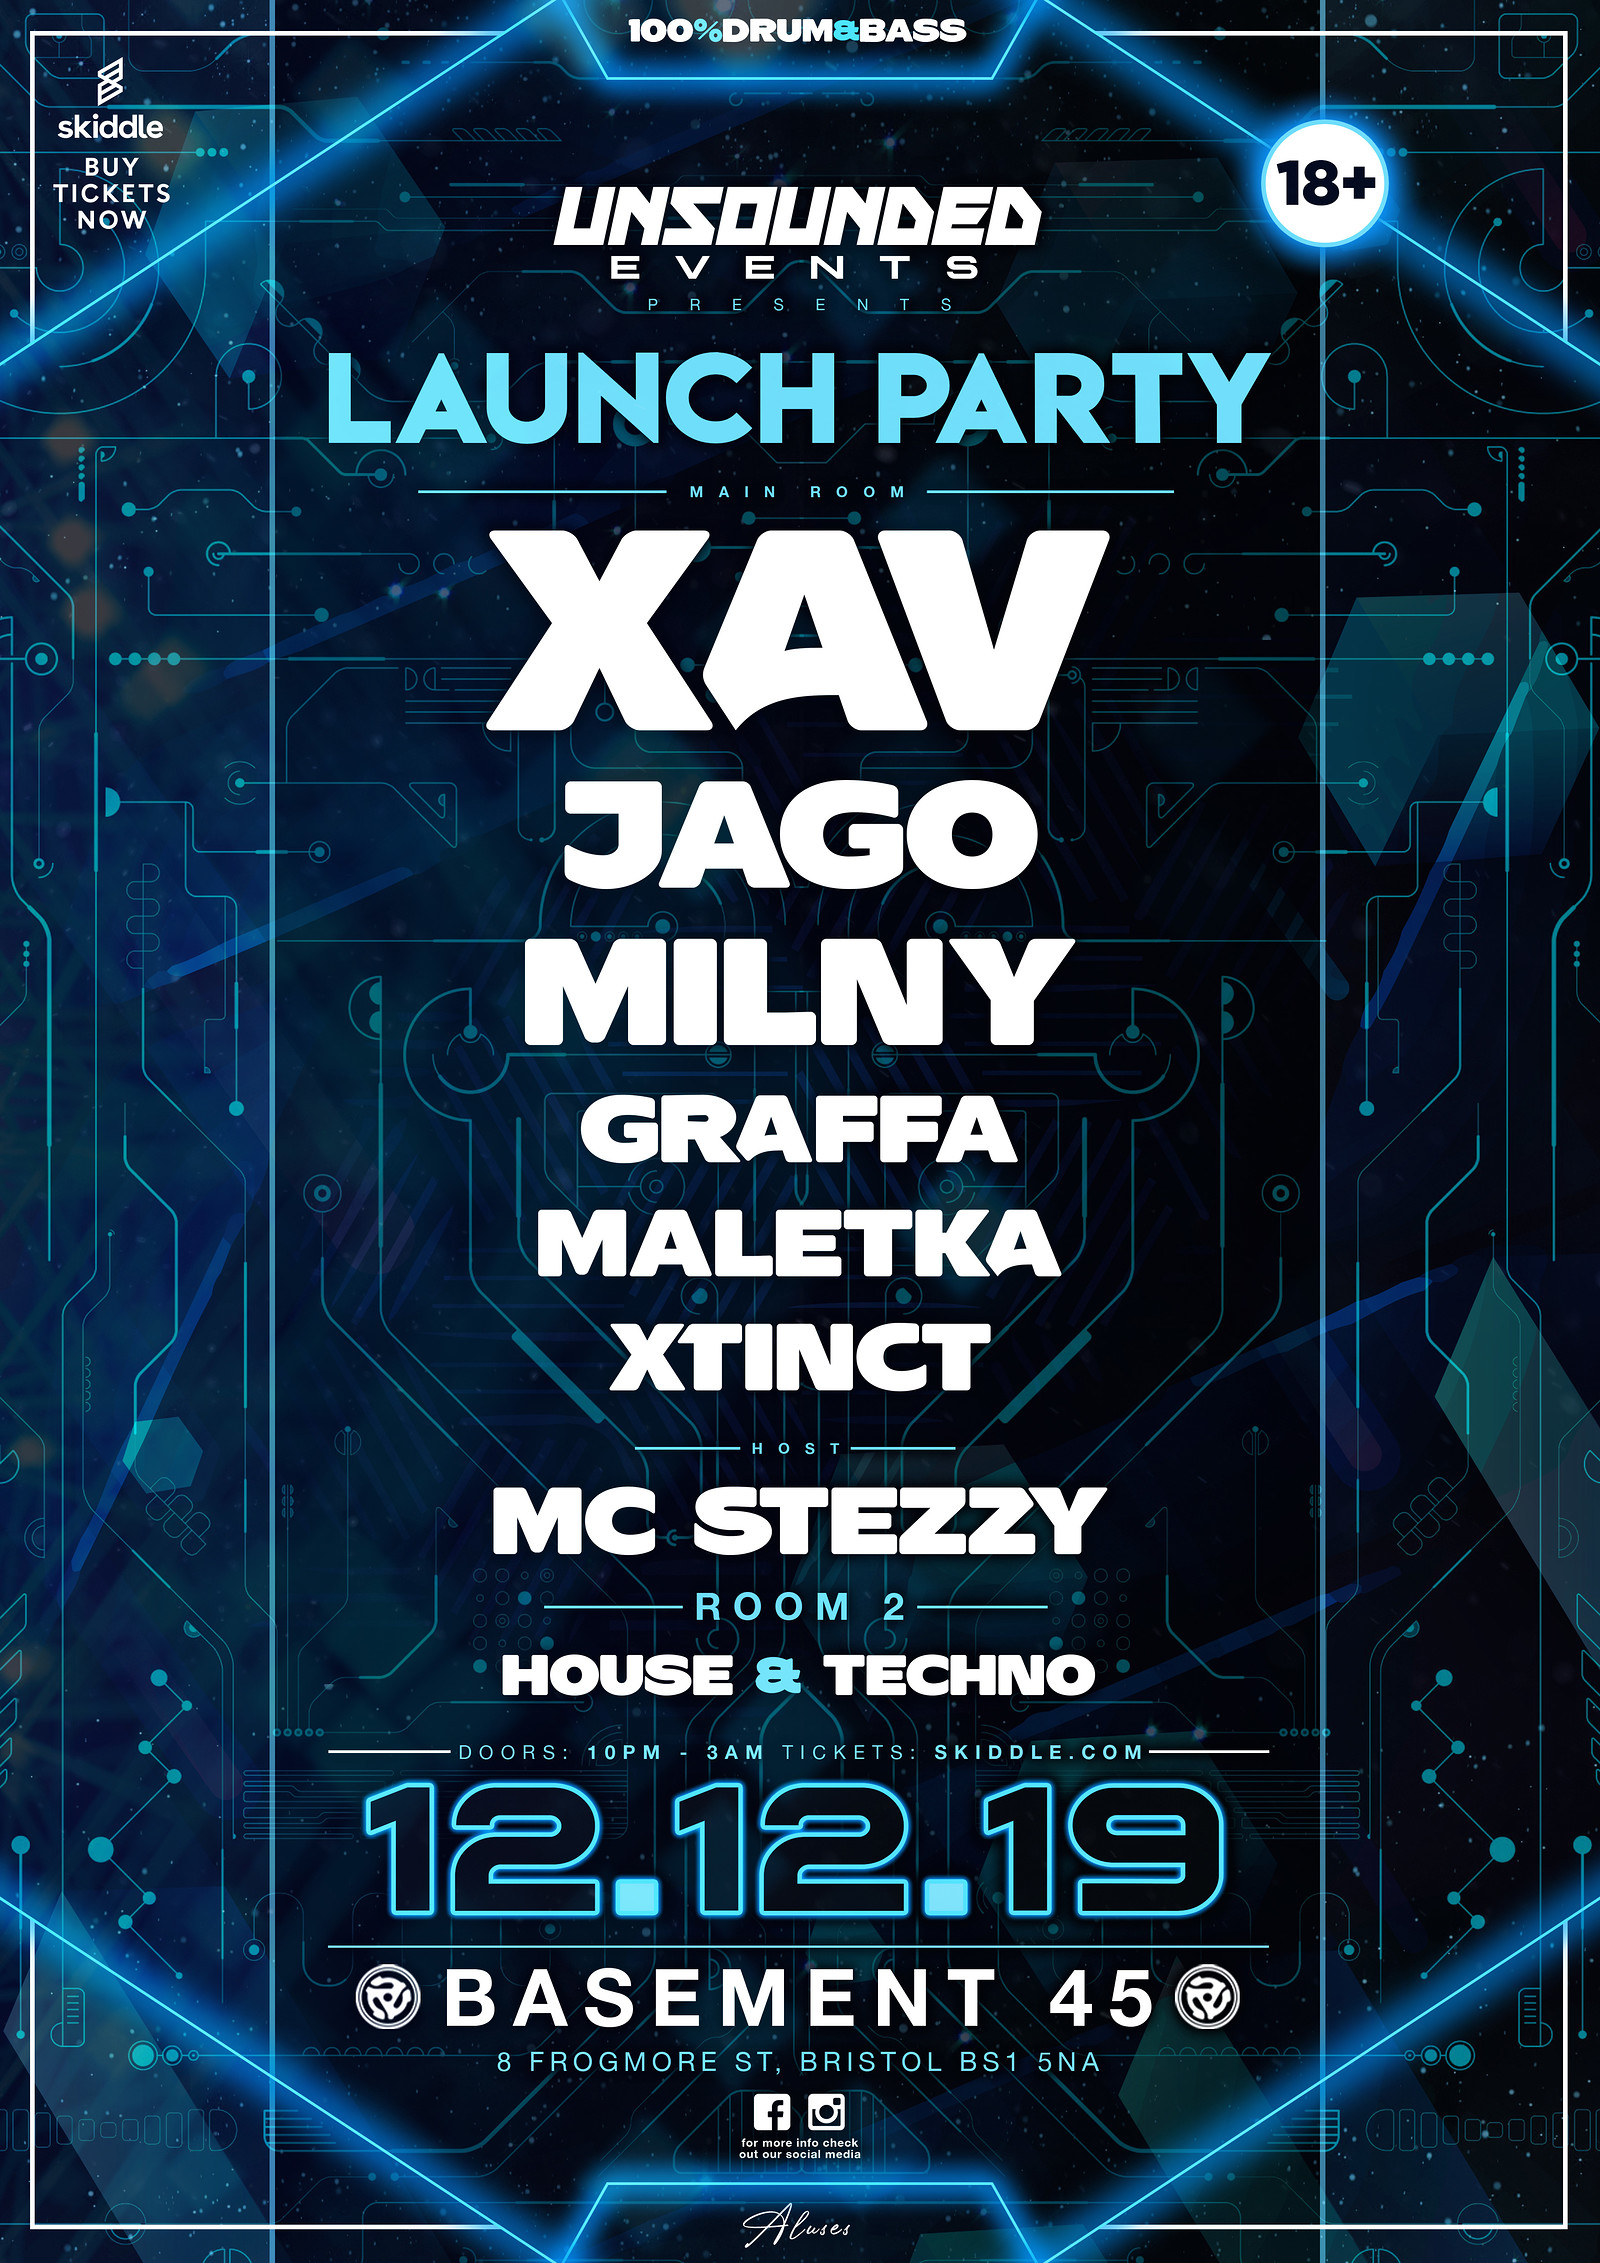 Unsounded Events - Launch Party - XAV, JAGO + MORE at Basement 45